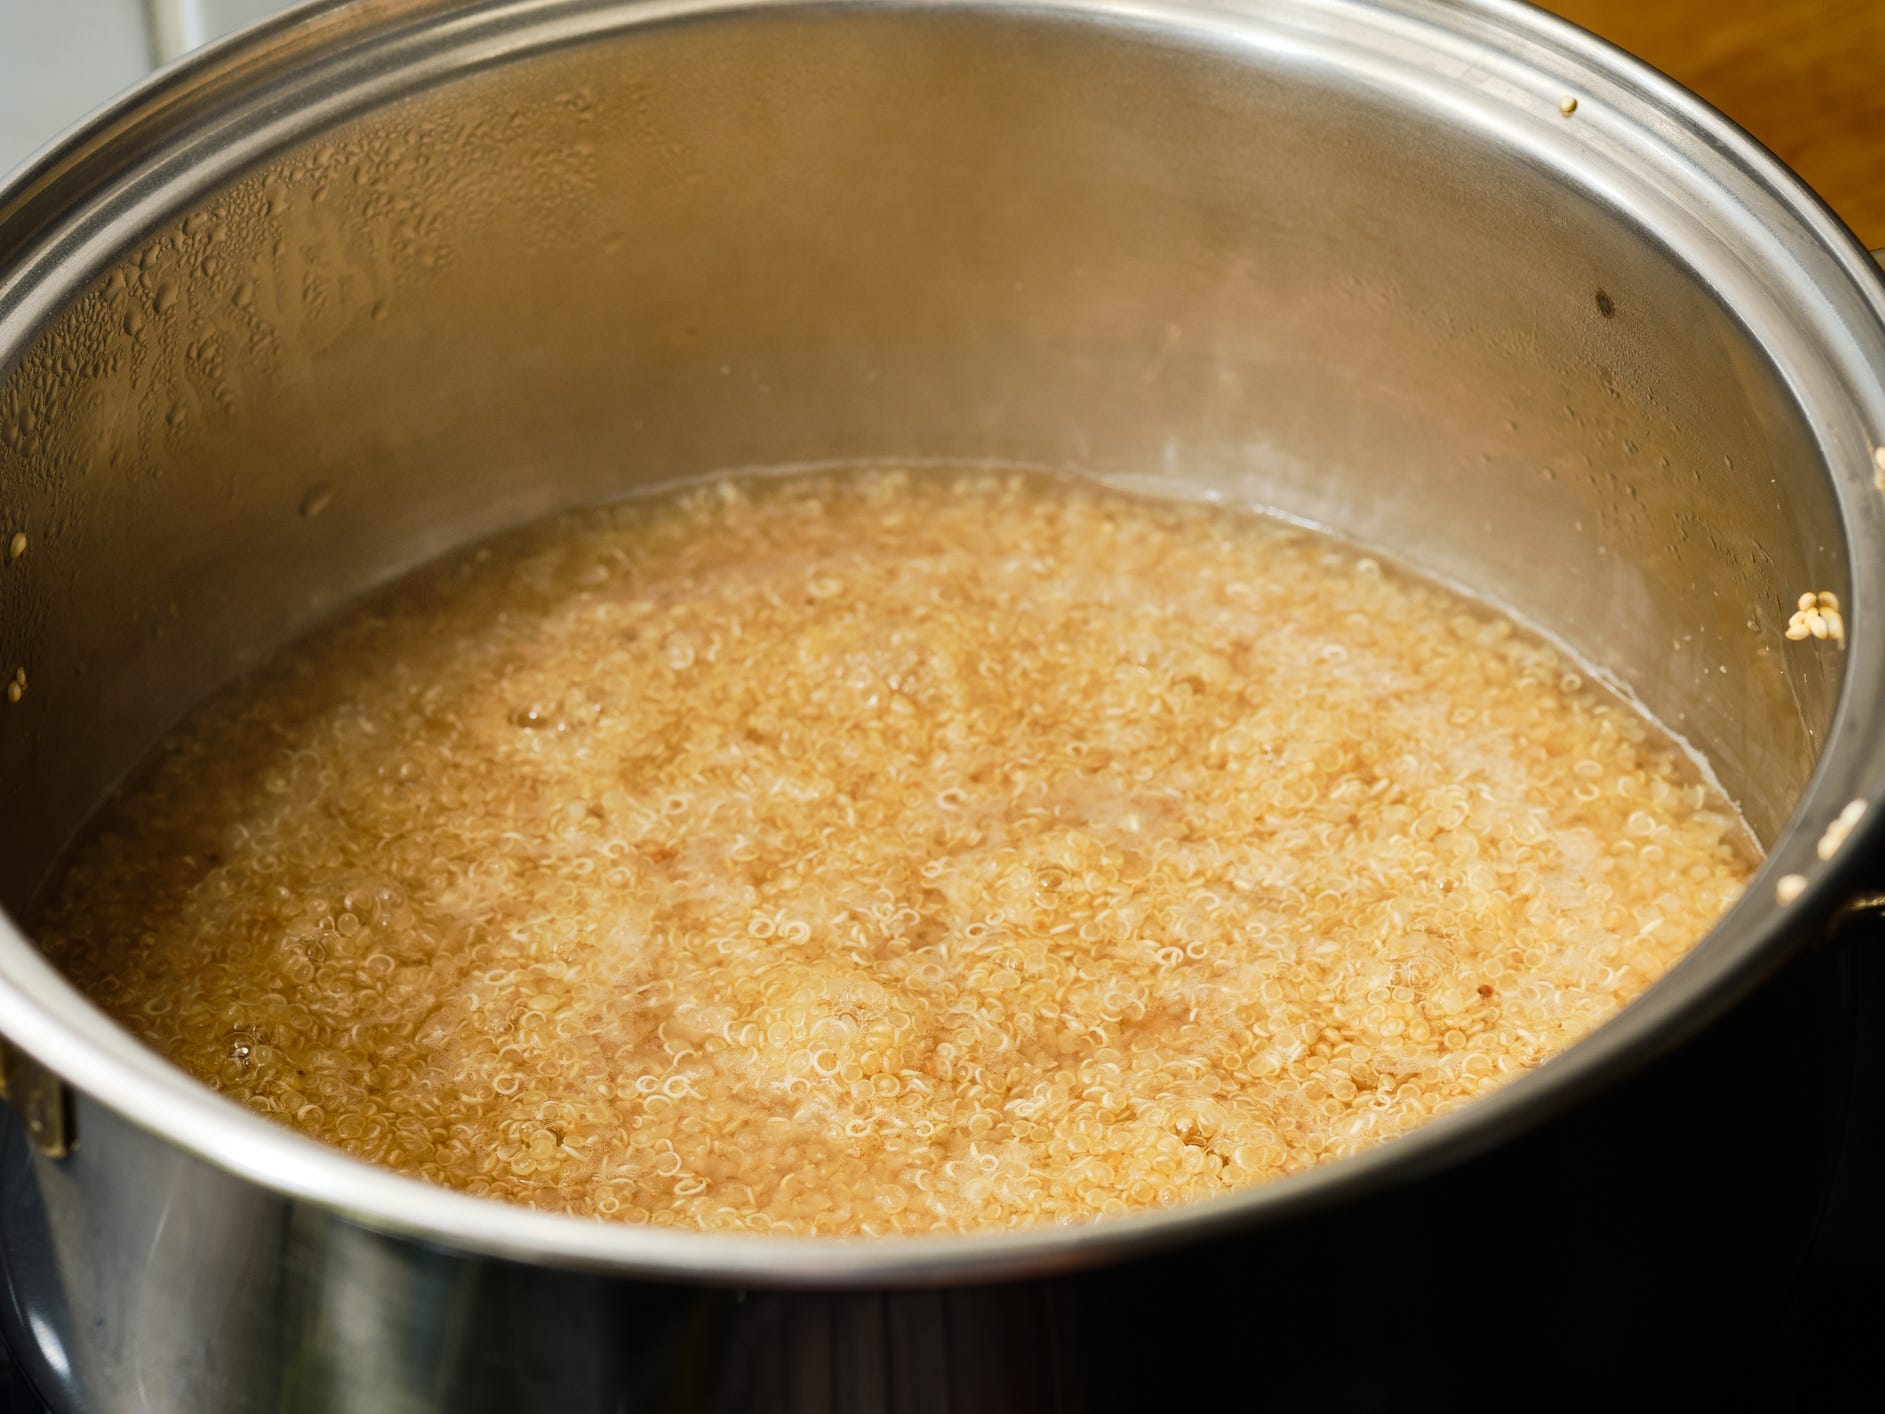 Quinoa getting cooked in a pot.